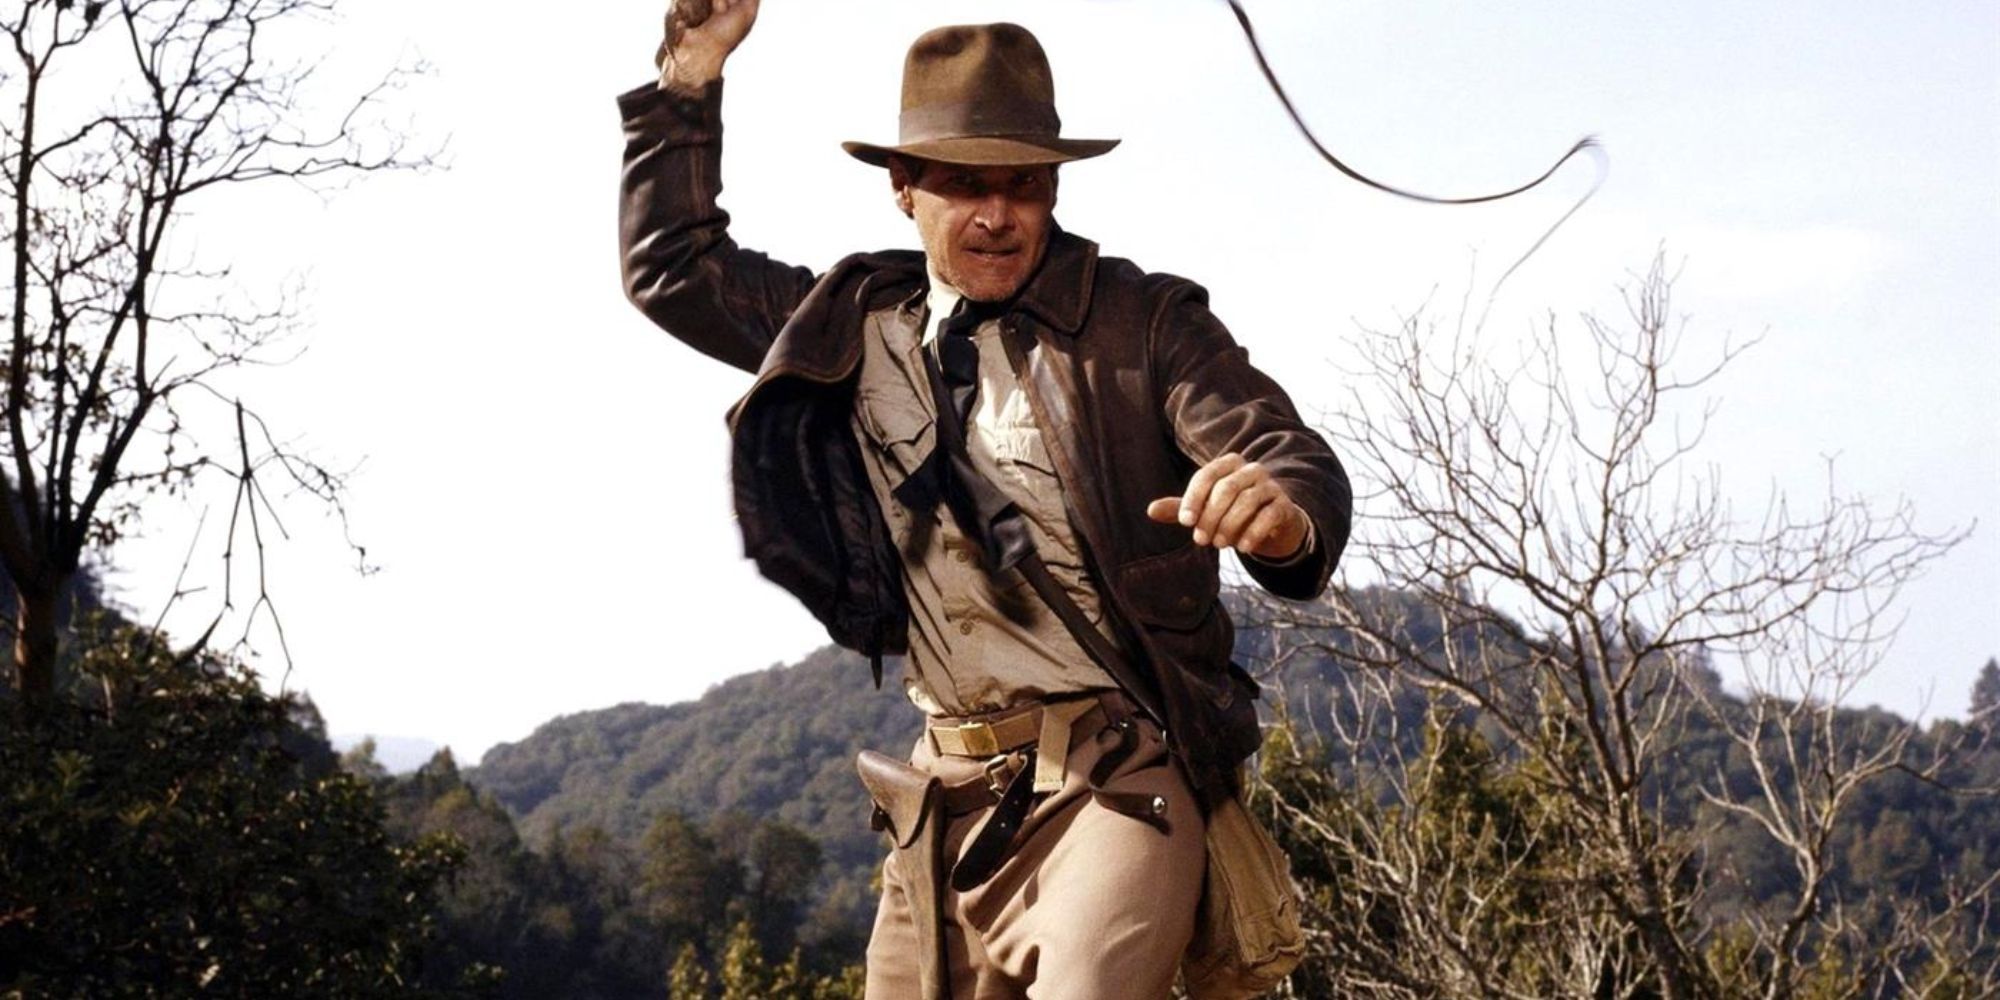 Harrison Ford as Indy in Indiana Jones: Raiders of the lost Ark